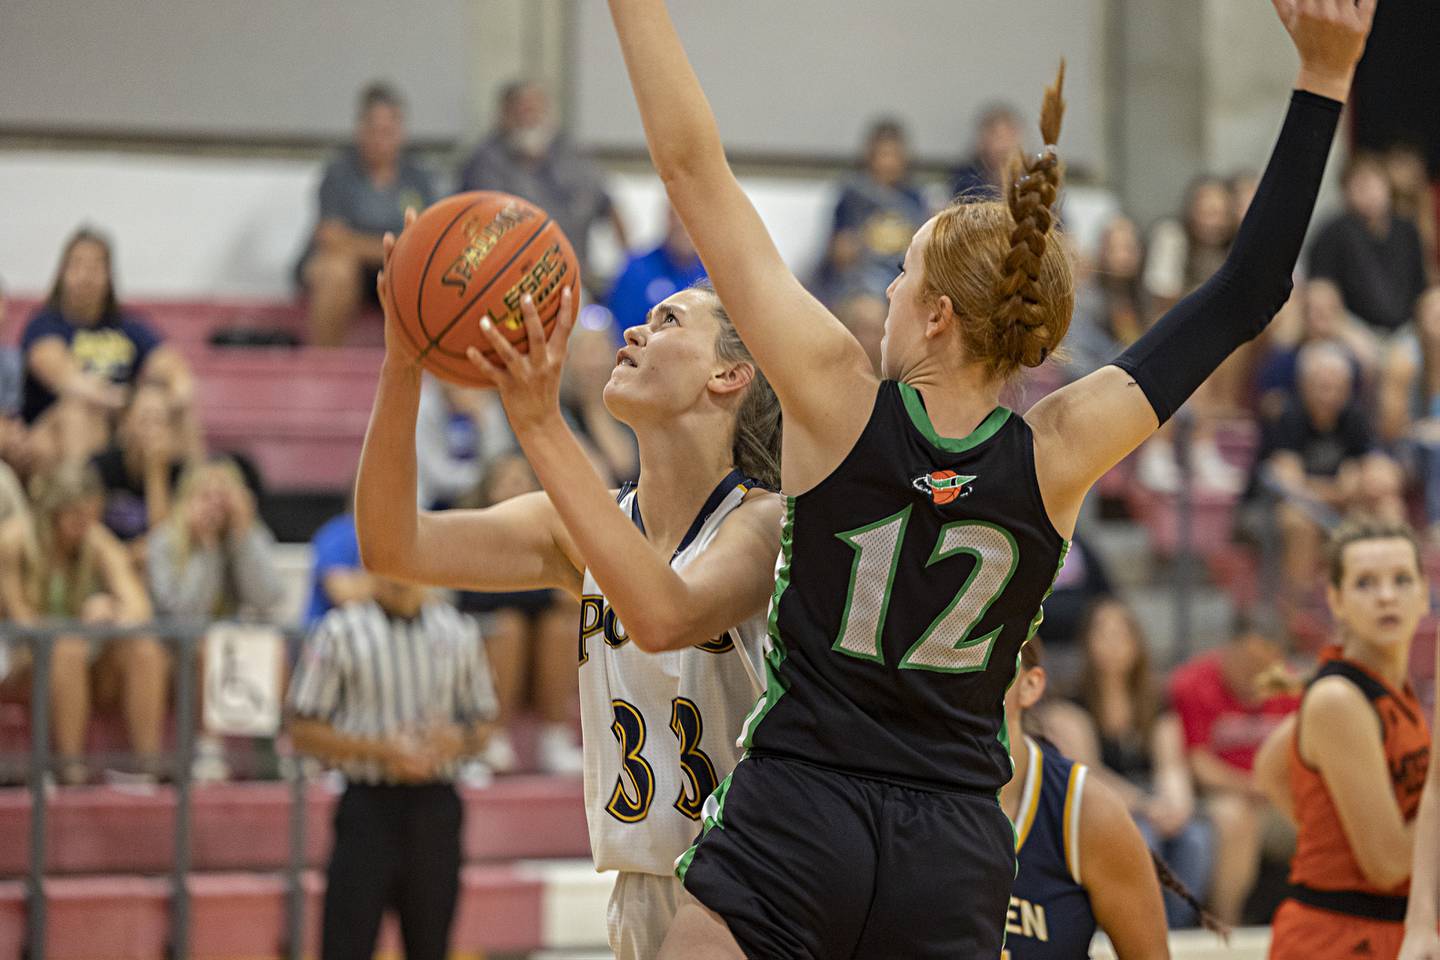 Polo’s Lindee Poper puts up a shot Thursday, June 15, 2023 during the Sauk Valley Media All-Star Basketball Classic at Sauk Valley College.